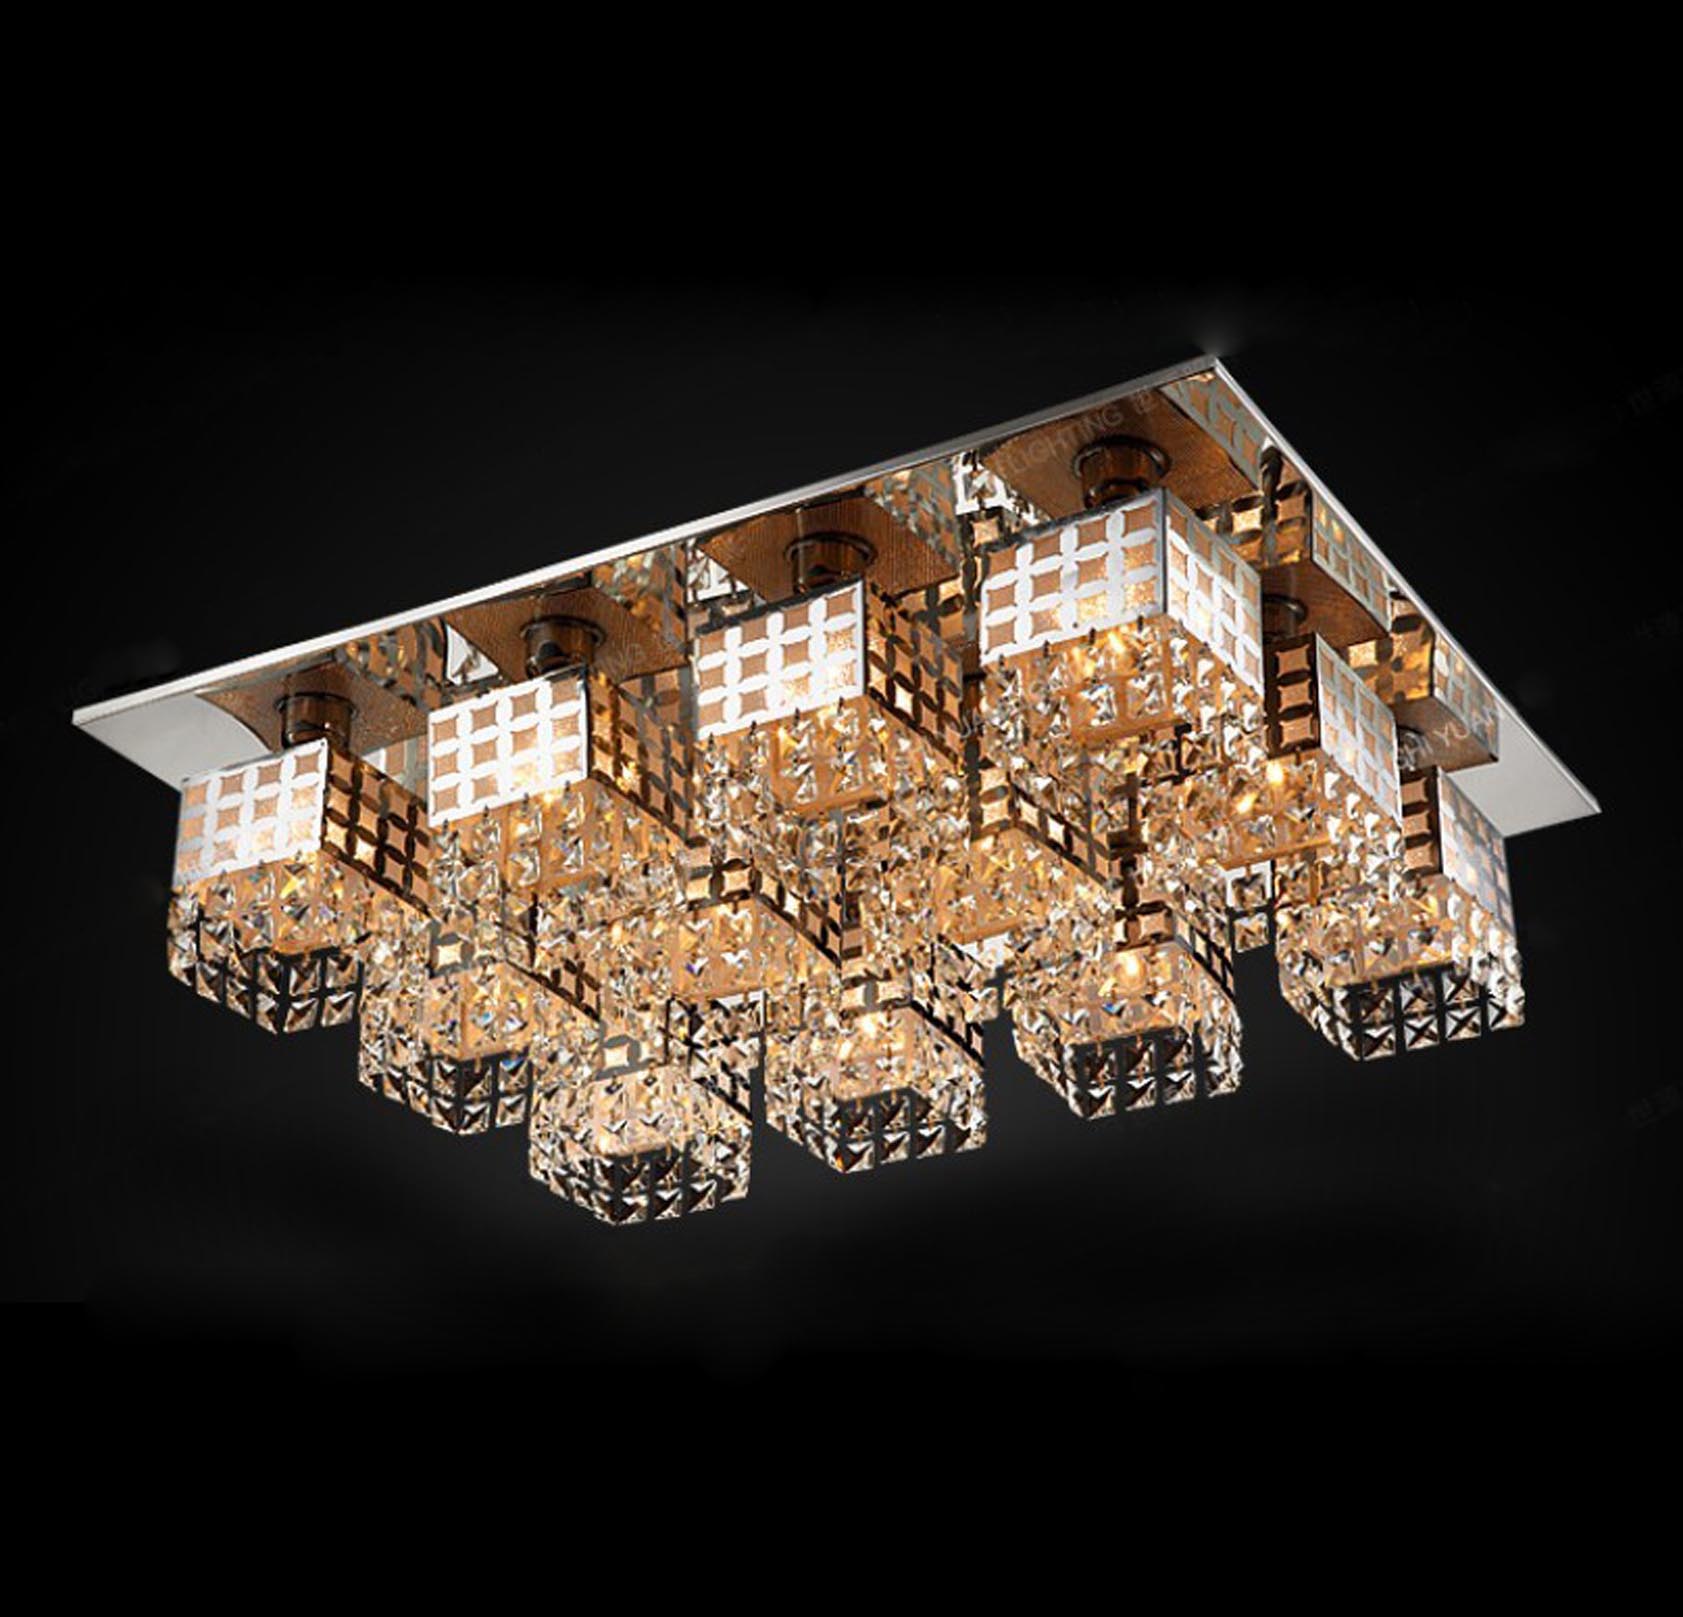 Decorative Modern ceiling lamp HL-9513-12X-1.Decorative Modern ceiling lamp HL-9513-12X                     2.reasonable price and best service;                   3.Protection of your sale area,ideas of design and all your private information                        4.Application:Meeting room,restaurant,sitting room,gallery,hotel,museum,church,shopping mall,etc.